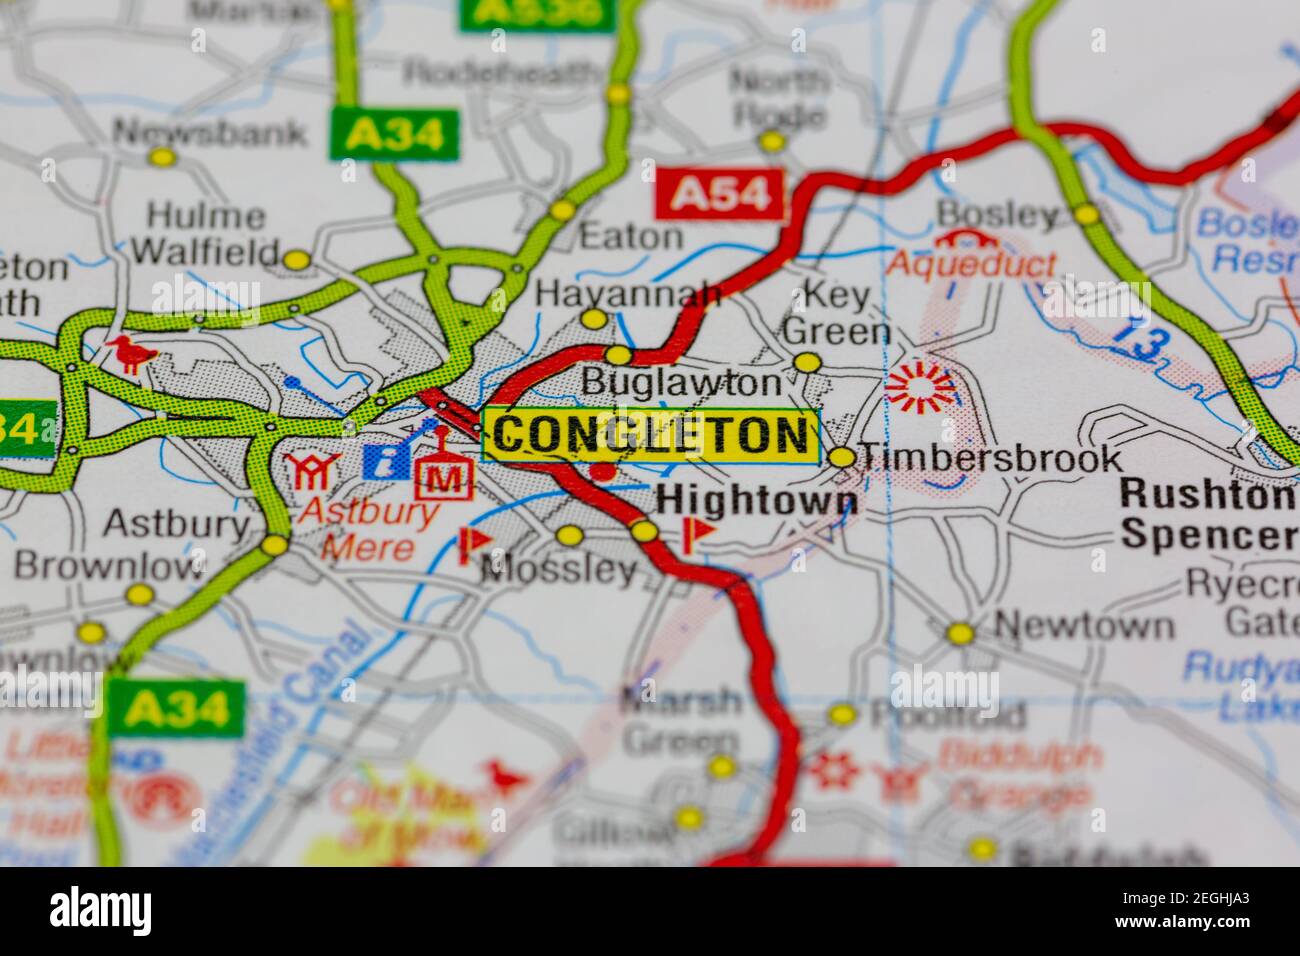 Congleton and surrounding areas shown on a road map or geography map Stock Photo